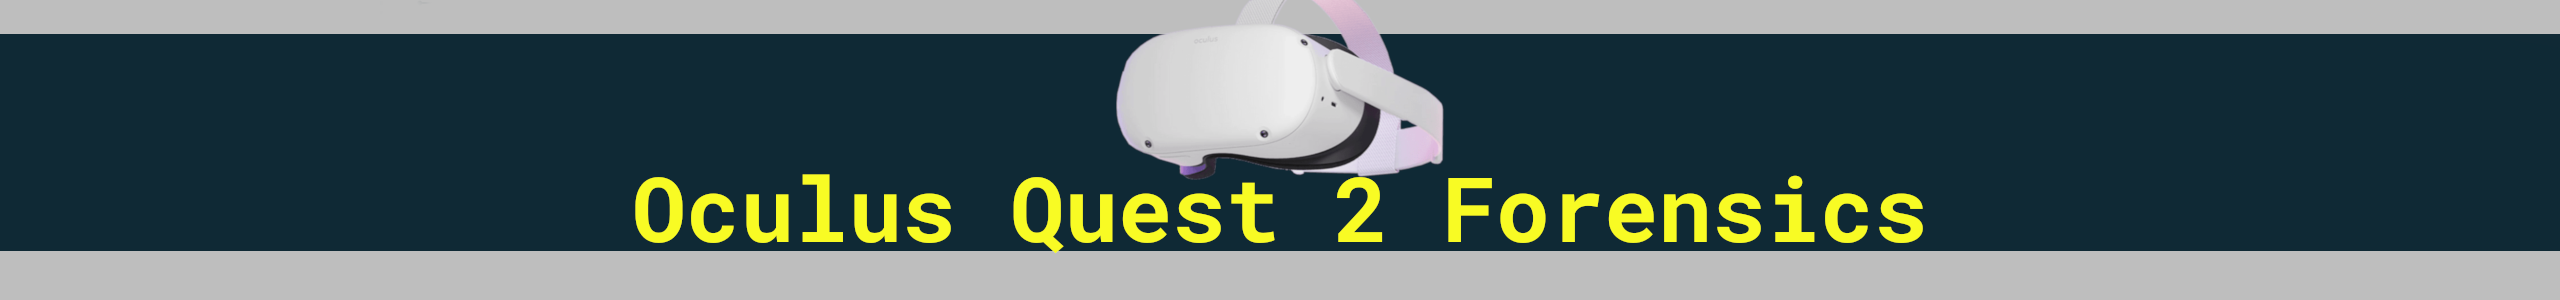 Oculus Quest 2 First Impressions and Research Notes